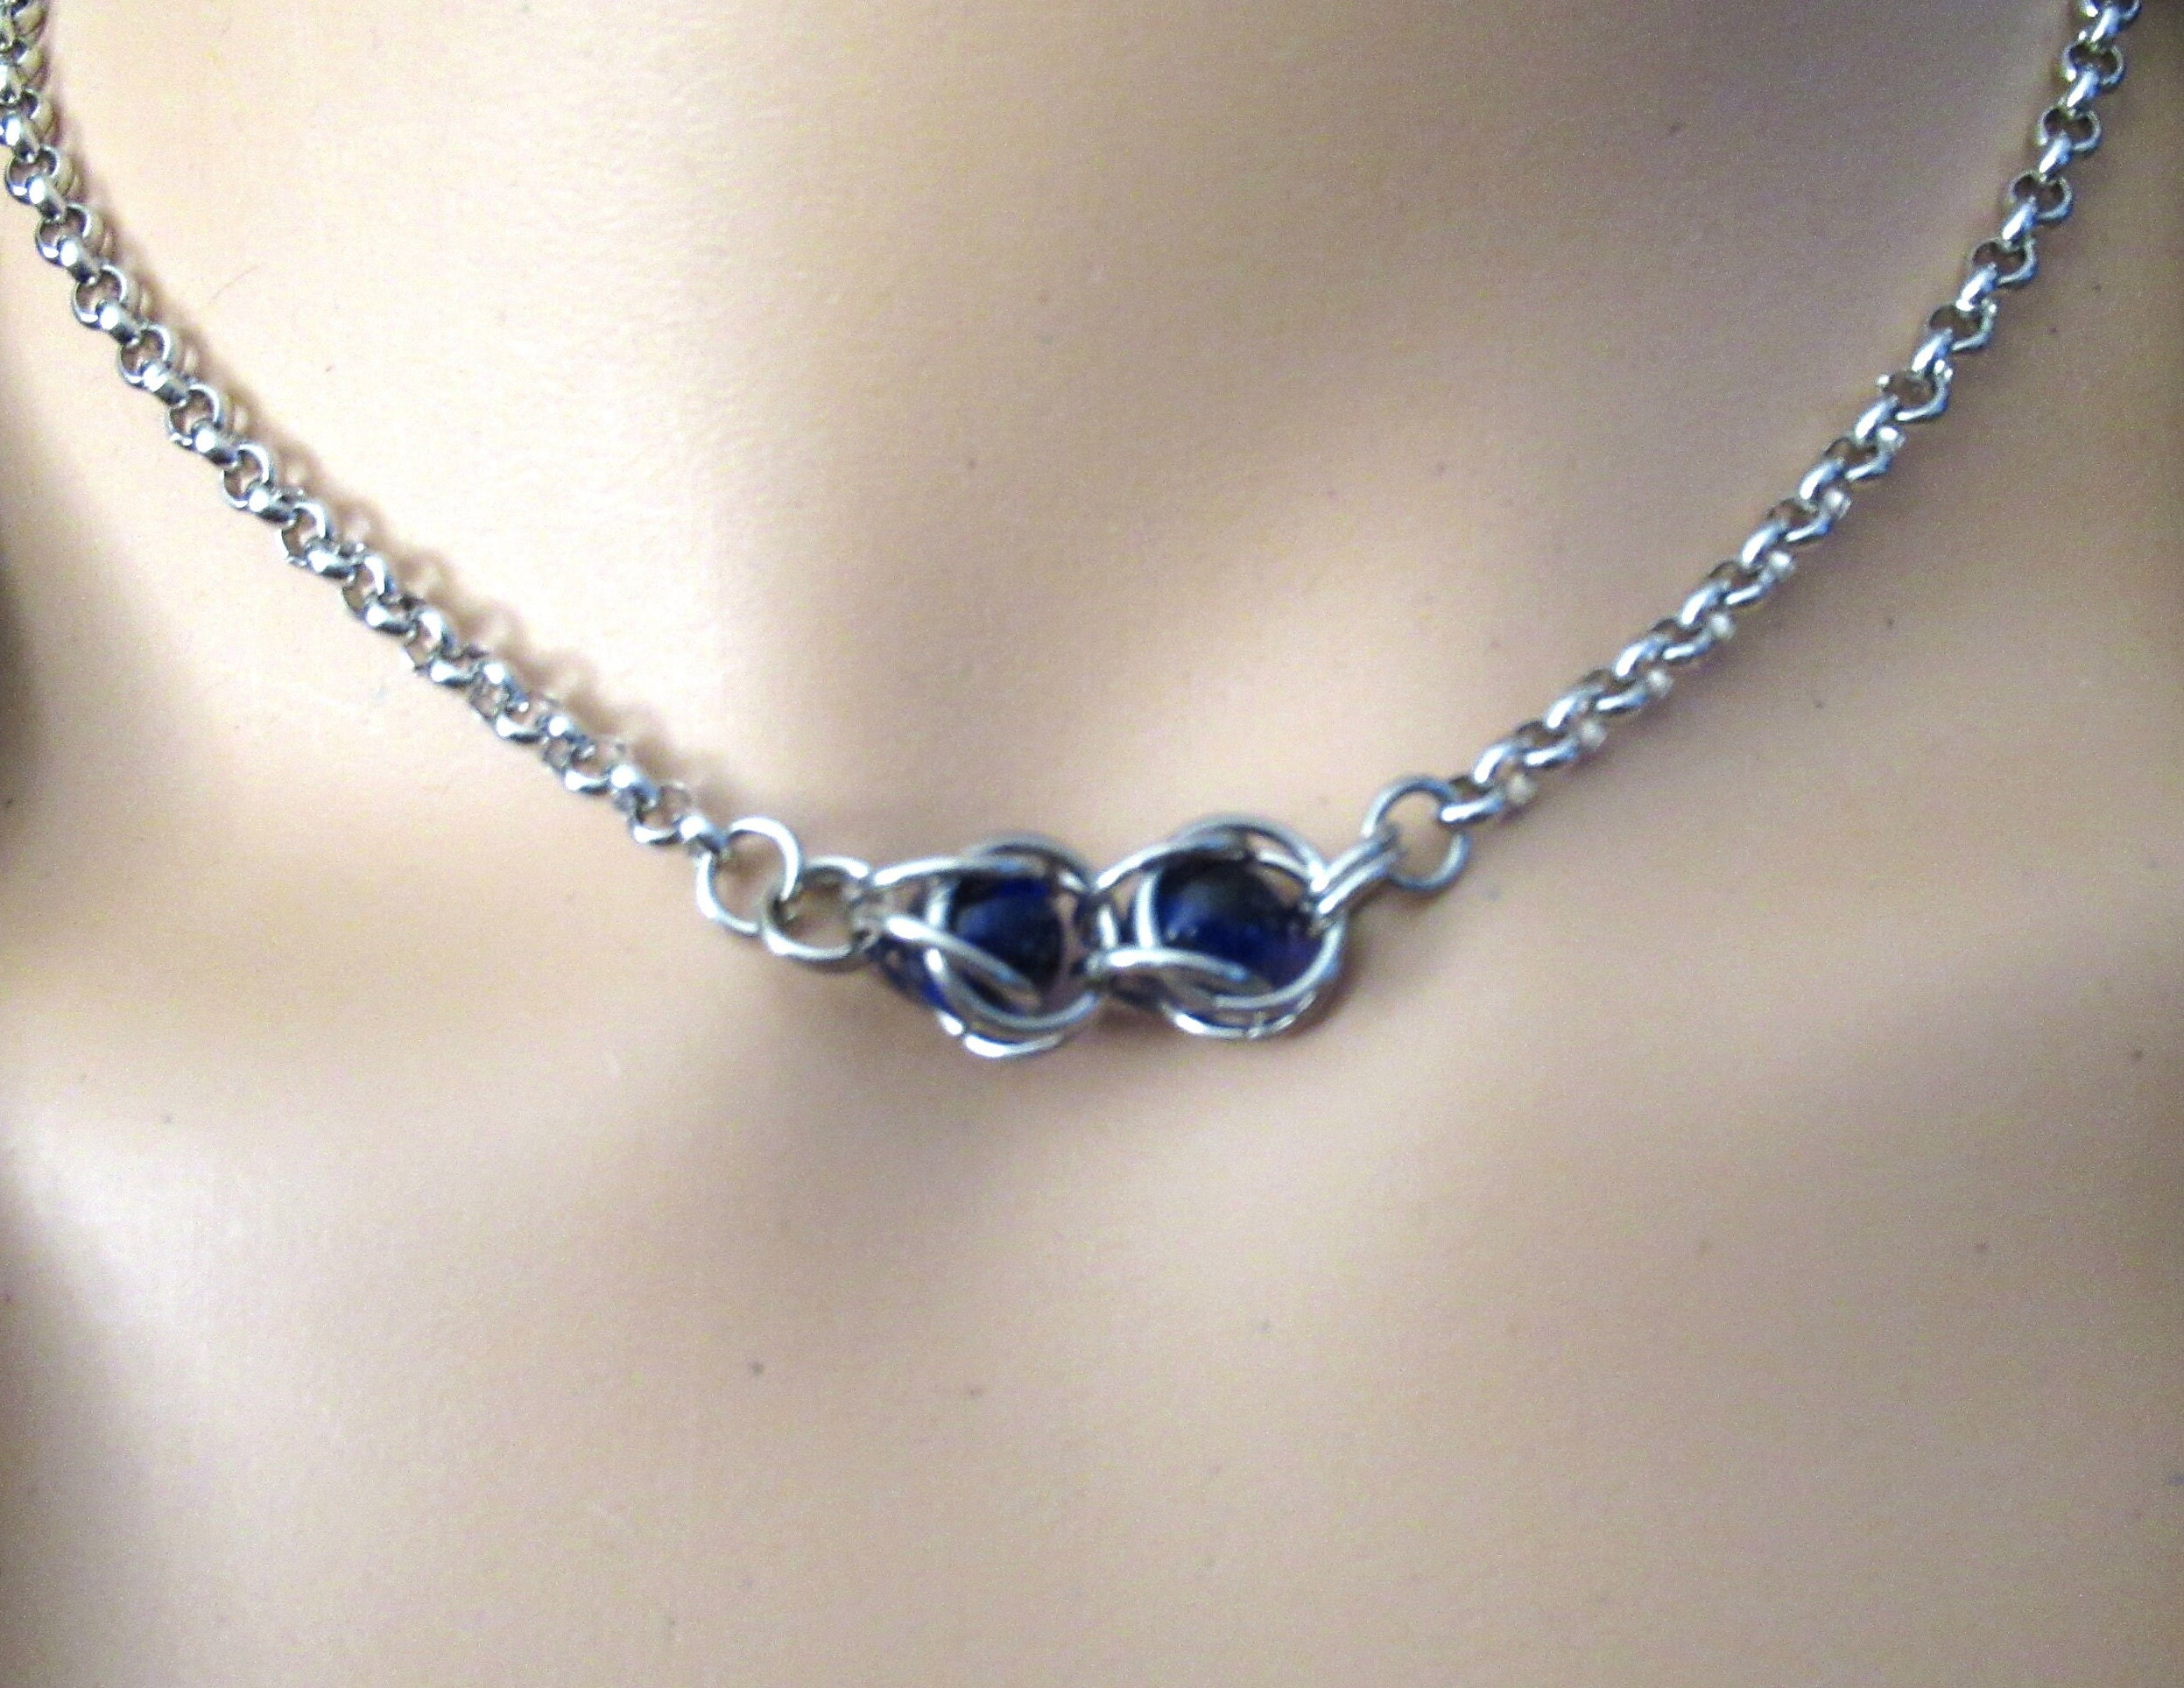 Sterling Silver Micro Caged Crystal Kit - Makes 8 inches of Chain